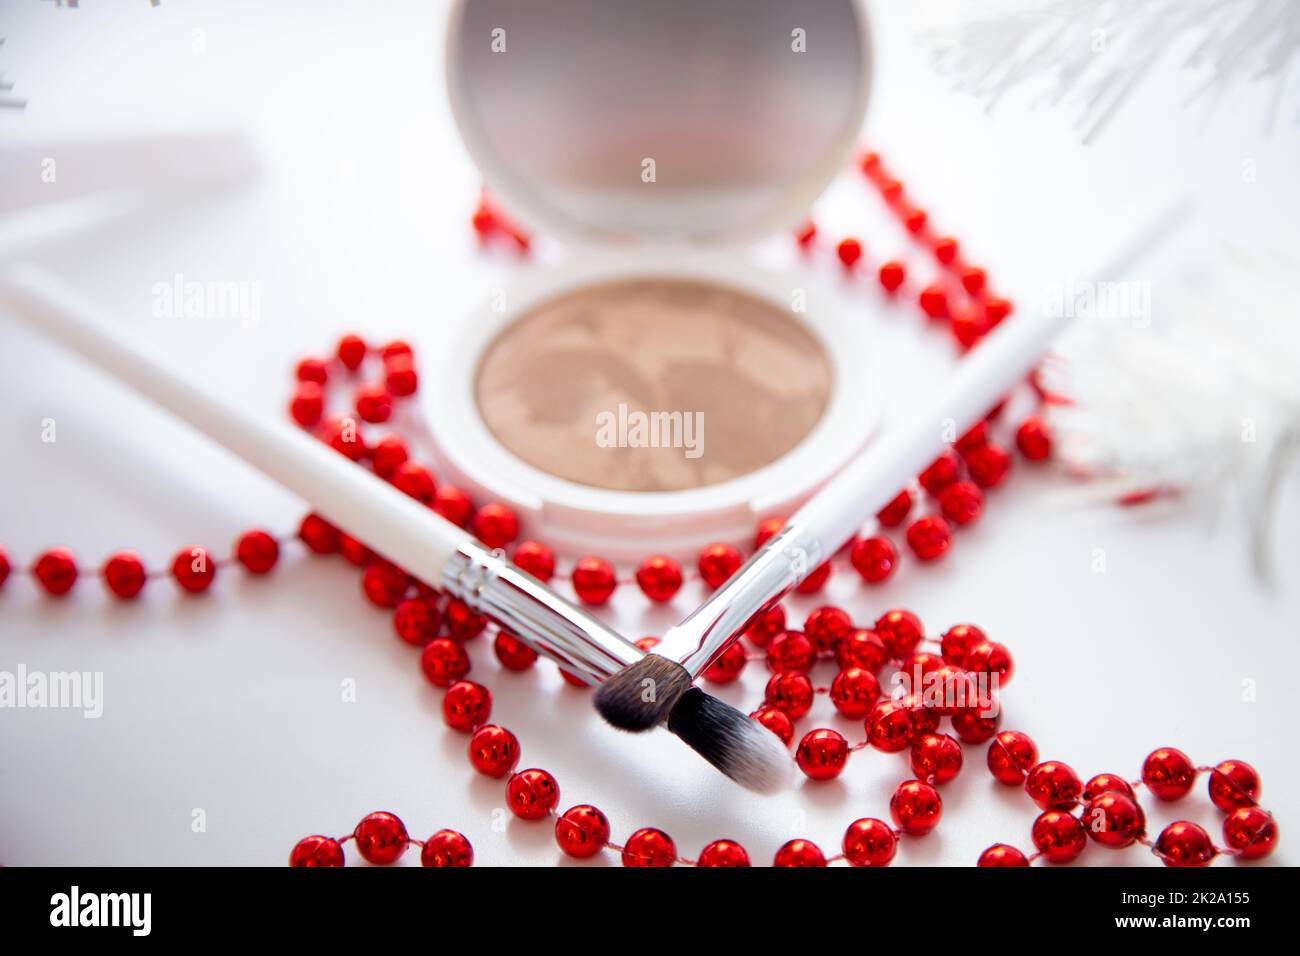 A white pillbox with powder and bronzer lies on a white background, thin makeup brushes and bright red beads lie in front. Stock Photo